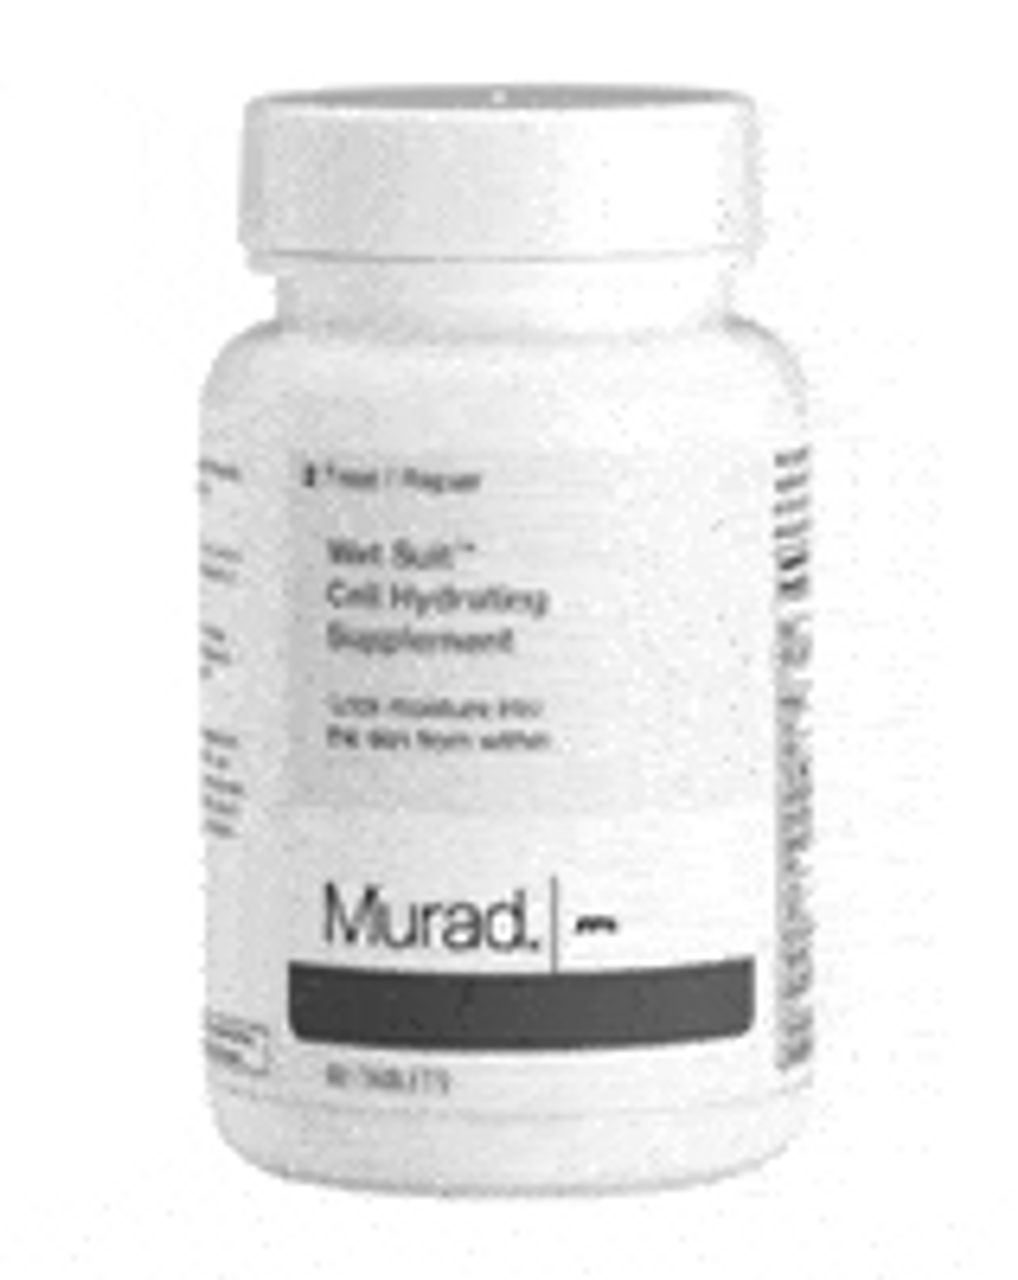 Murad Wet Suit Cell Hydrating Dietary Supplement, 60 tablets